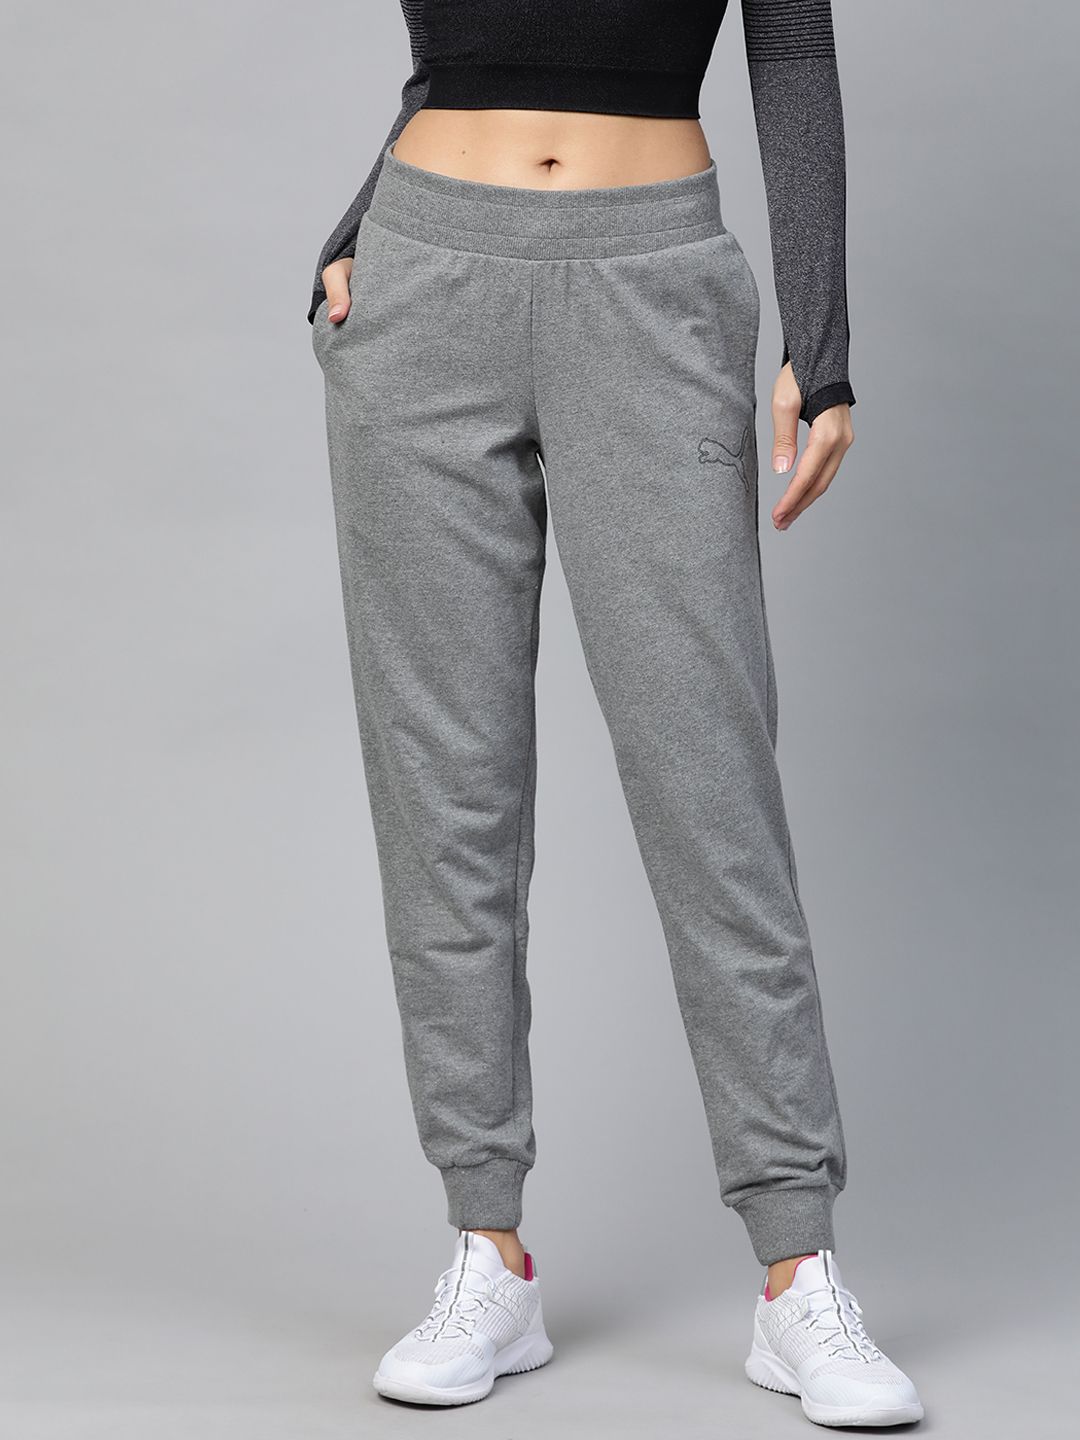 Puma Women Grey Melange Solid Graphic 4 Joggers Price in India